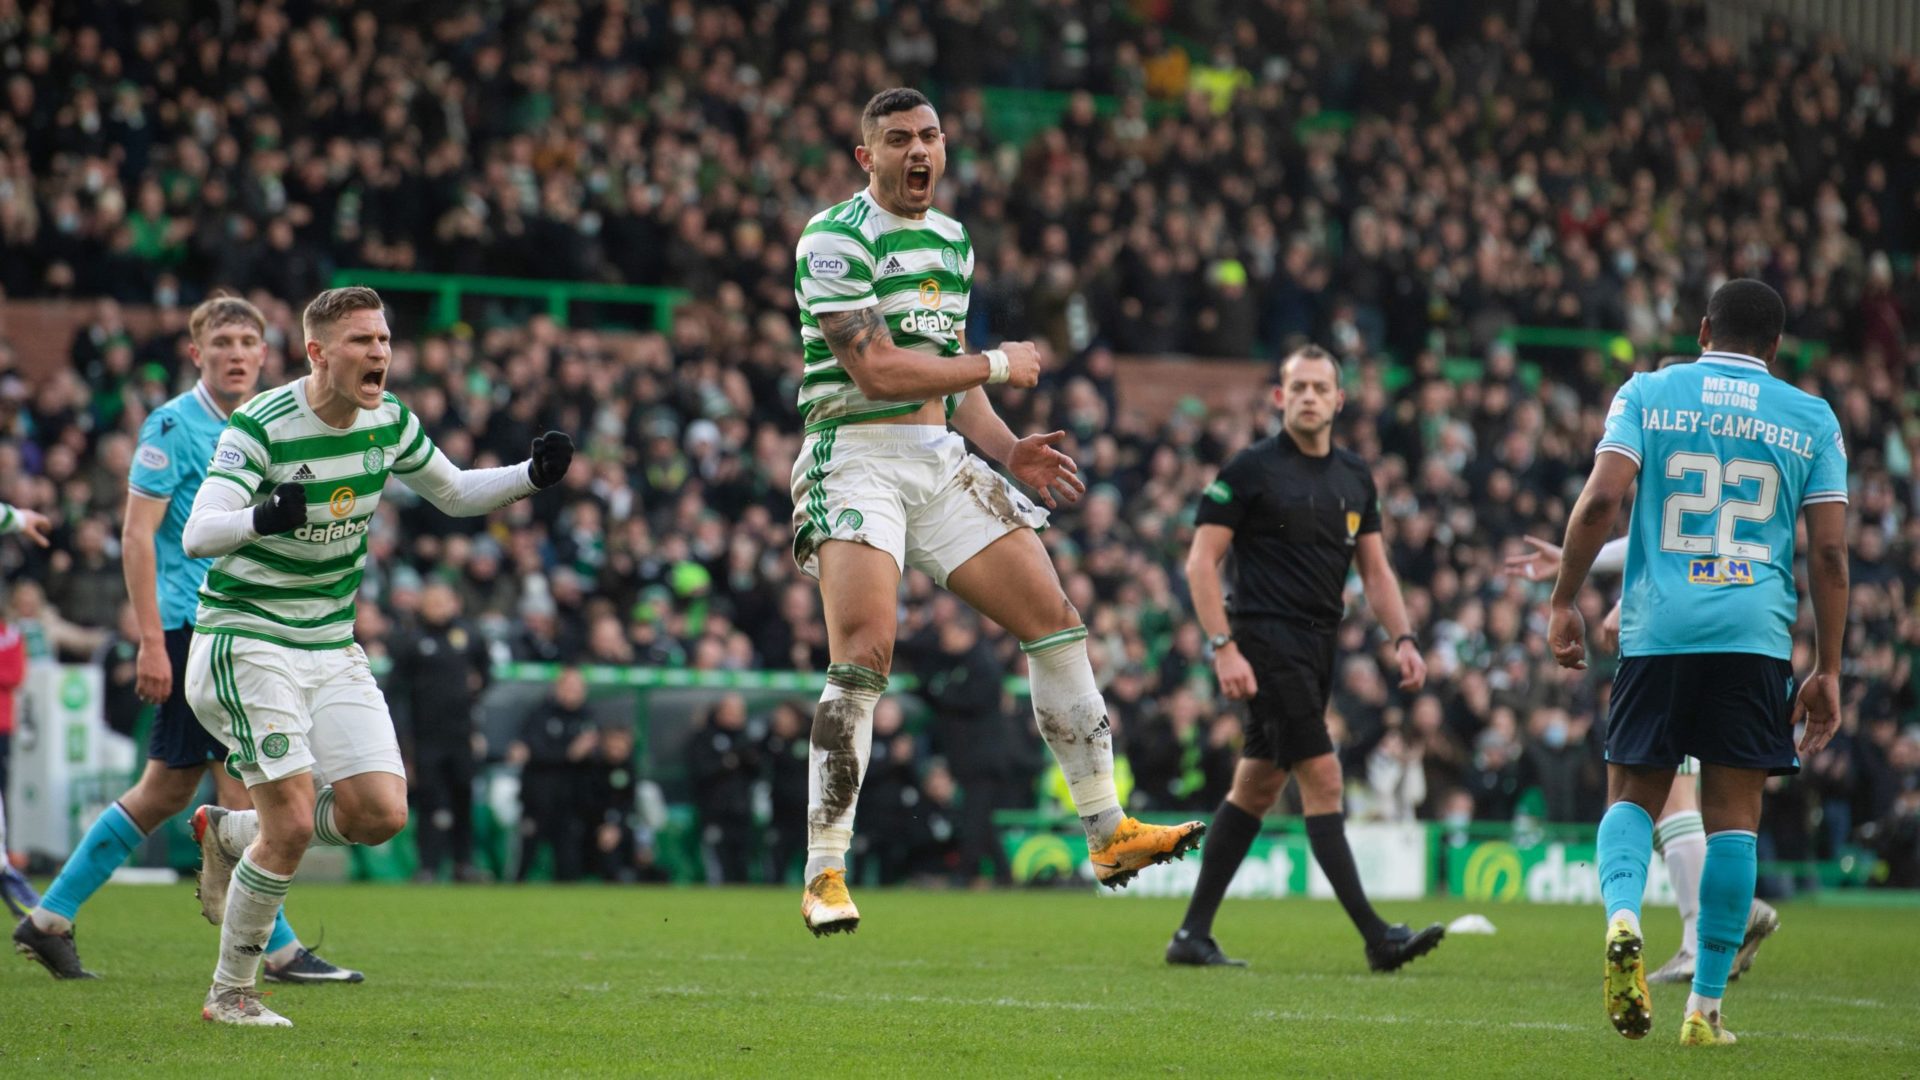 Giorgos Giakoumakis hat-trick moves Celtic three points clear at the top